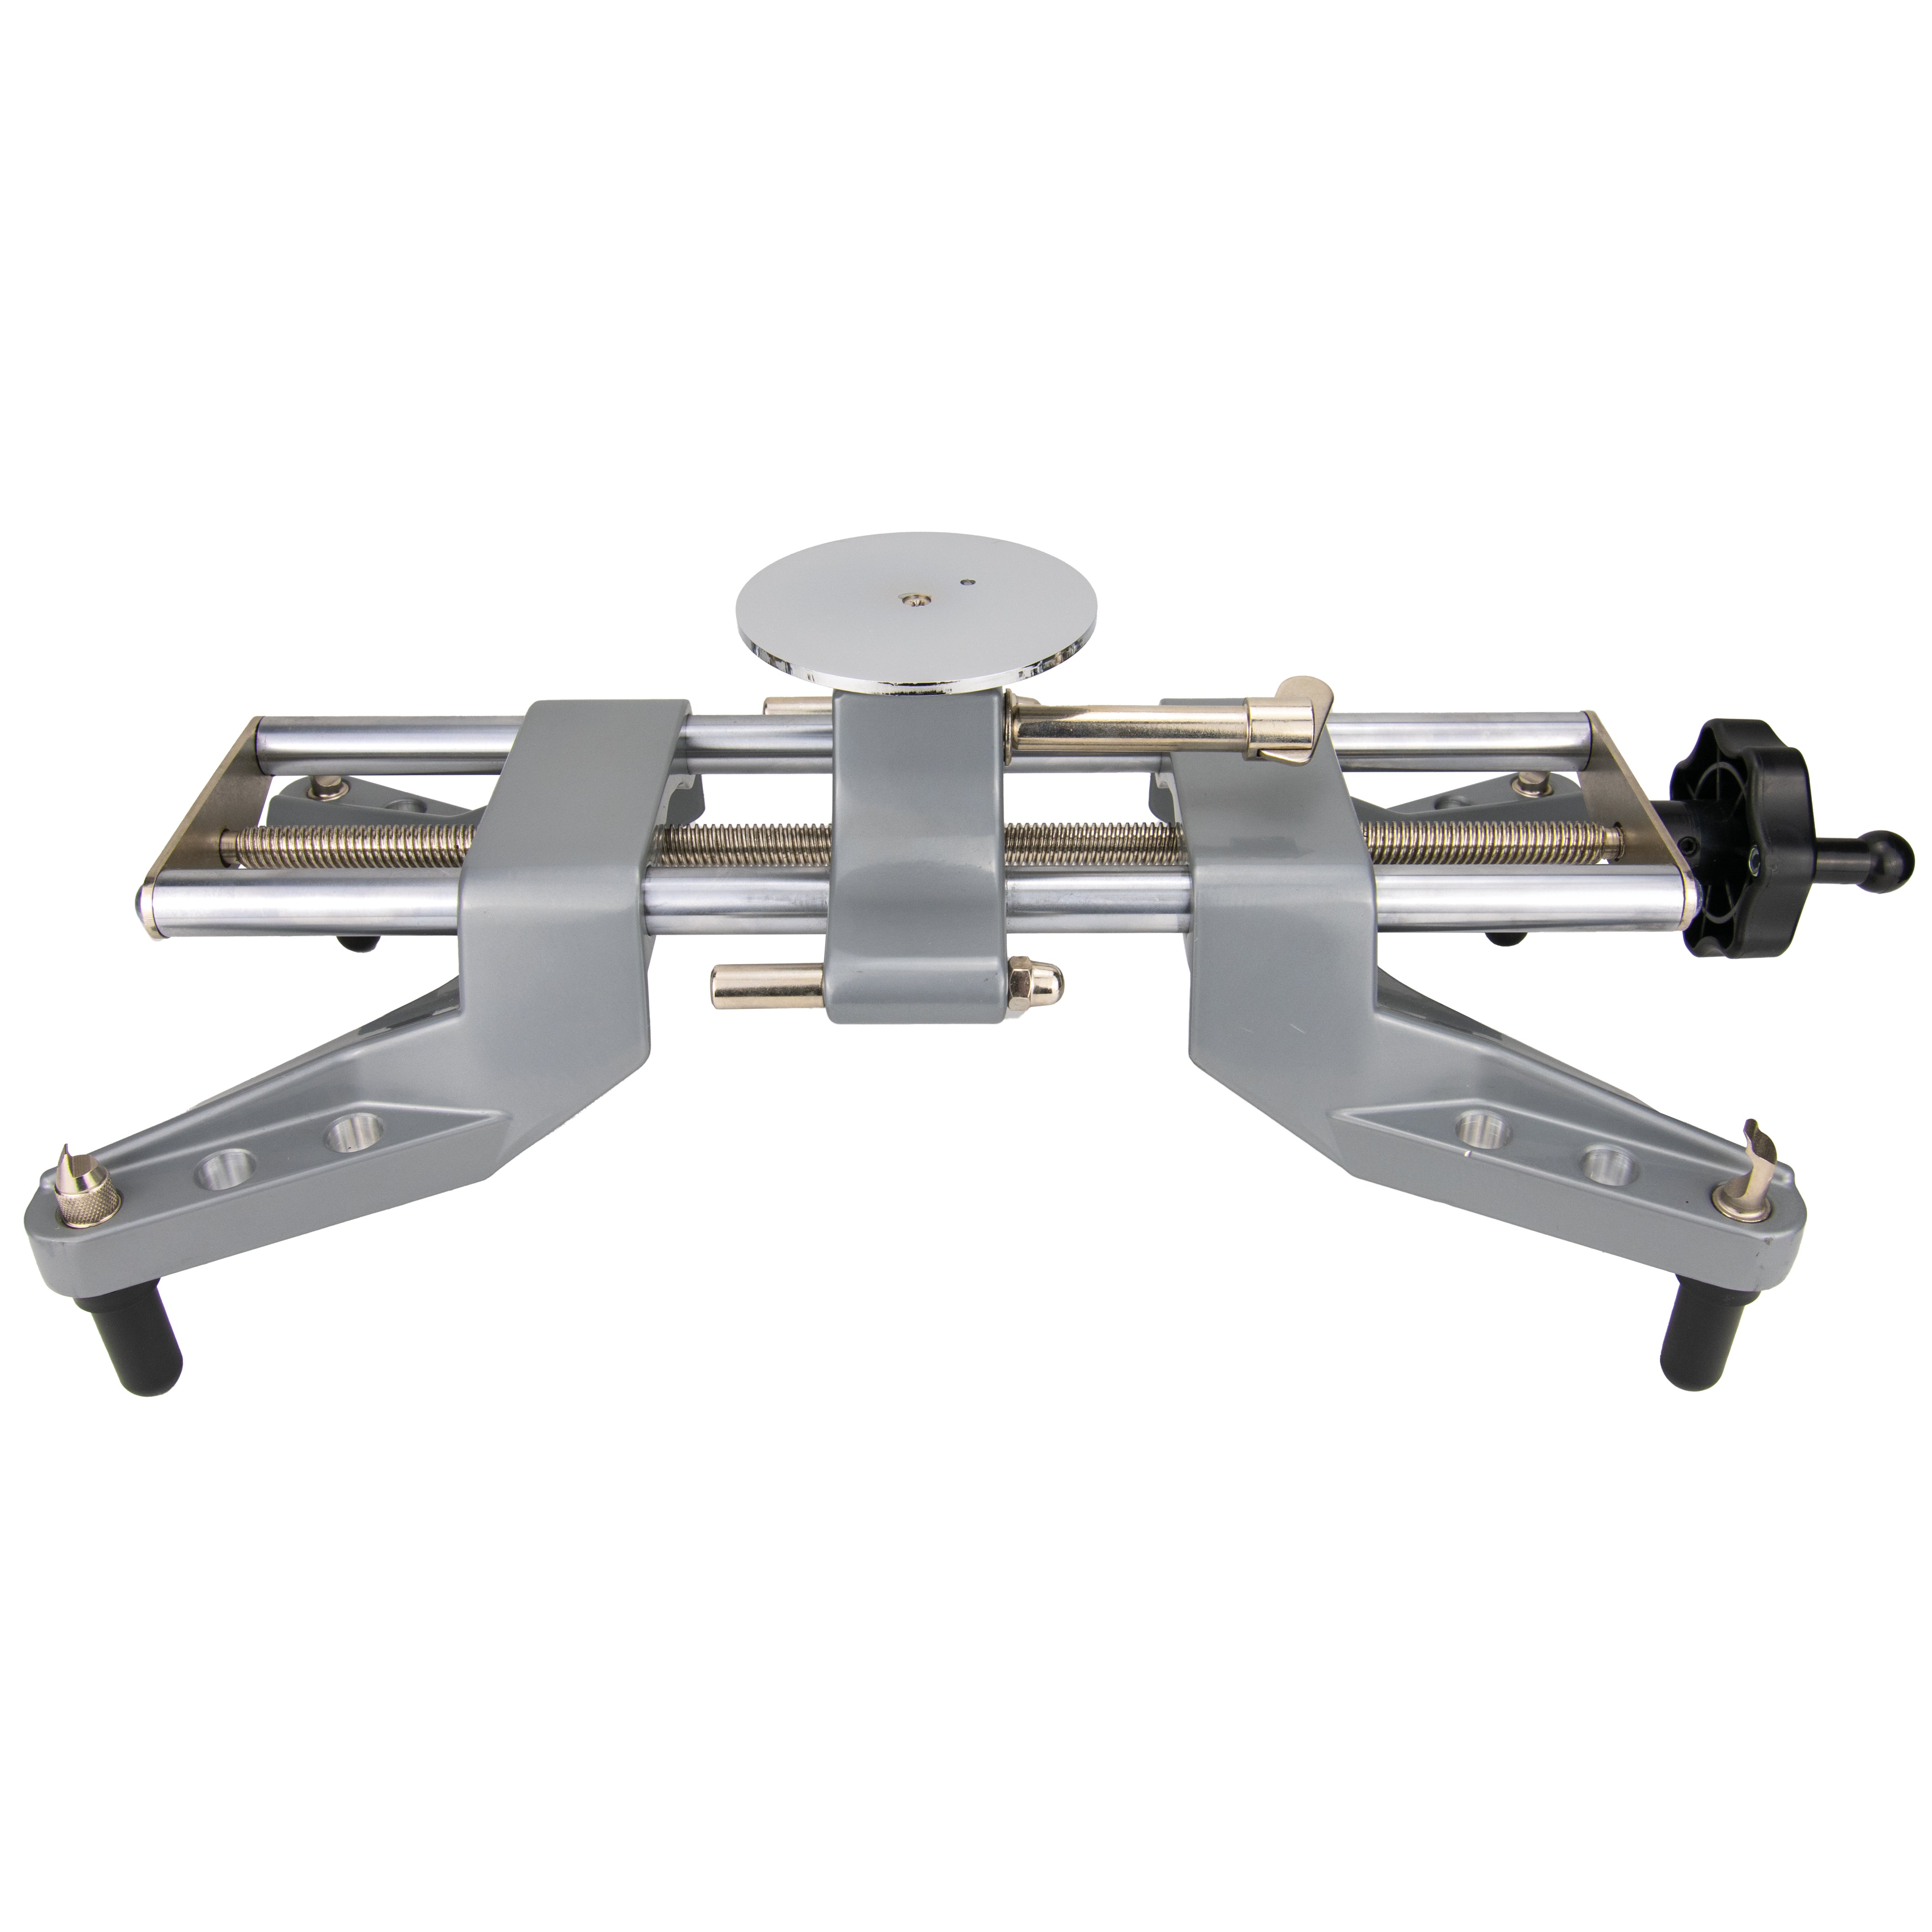 Image of Autosolo wheel clamp for wheel alignment